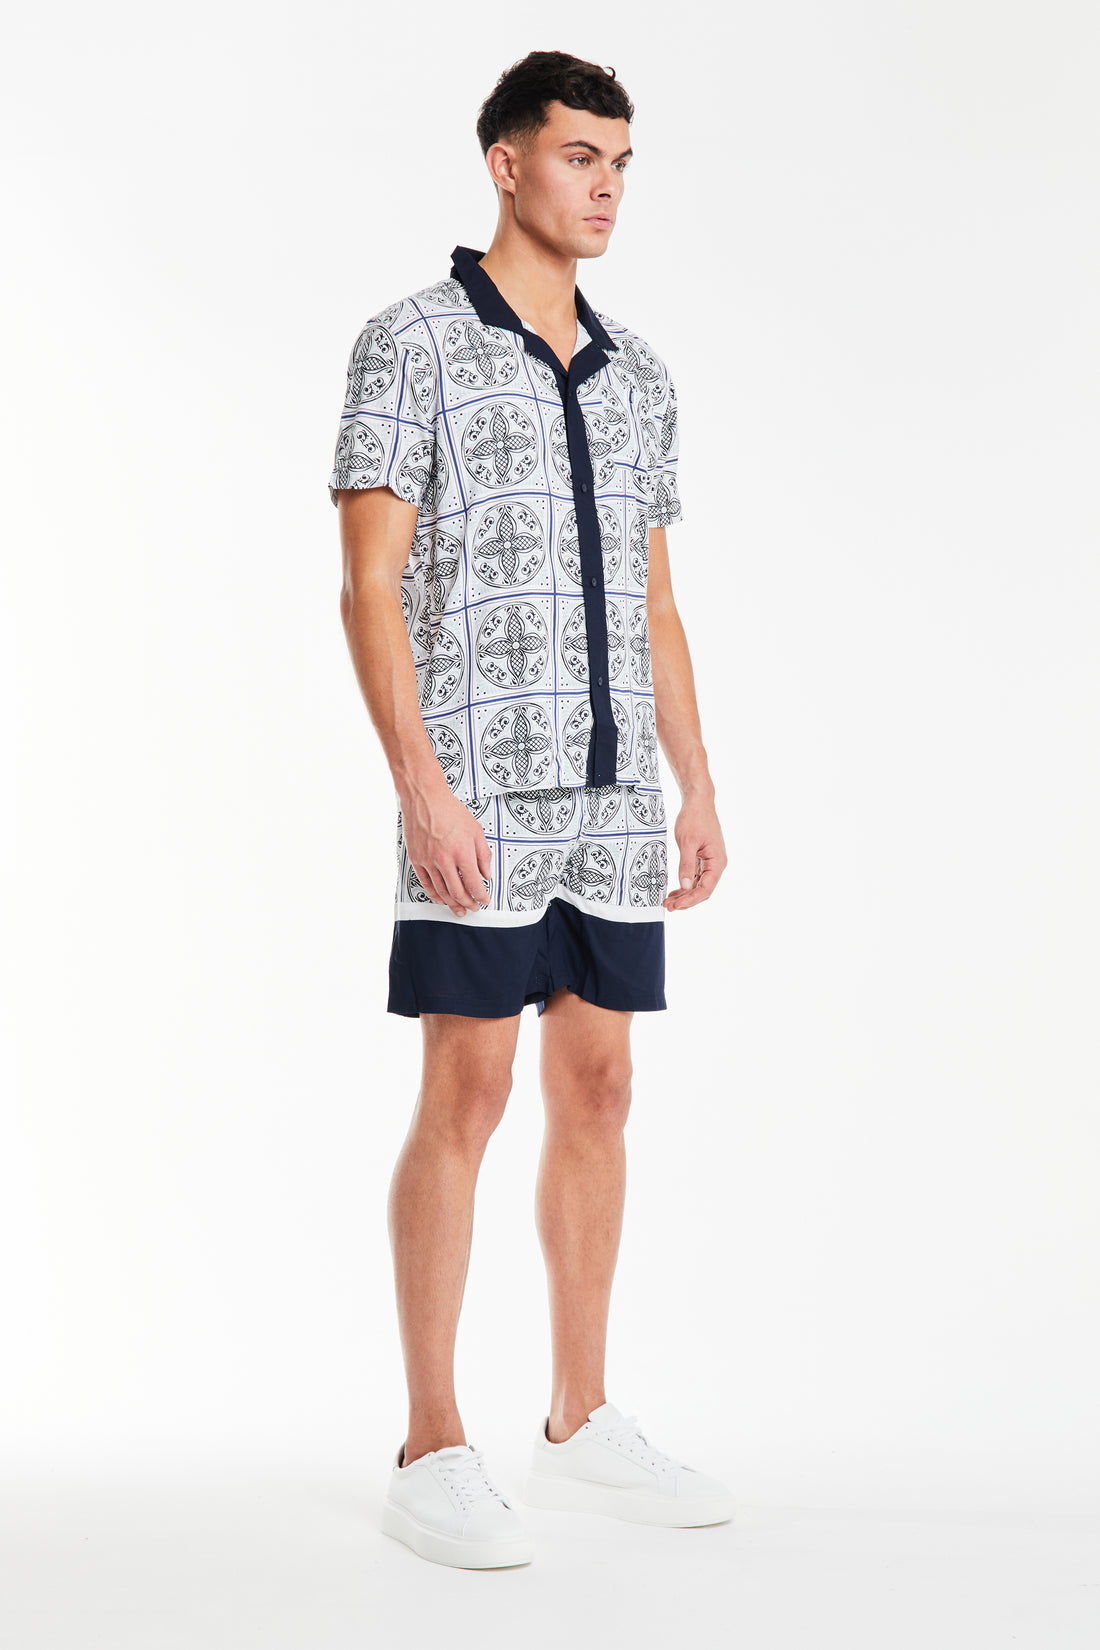 Men's summer twin sets in navy with white patterns